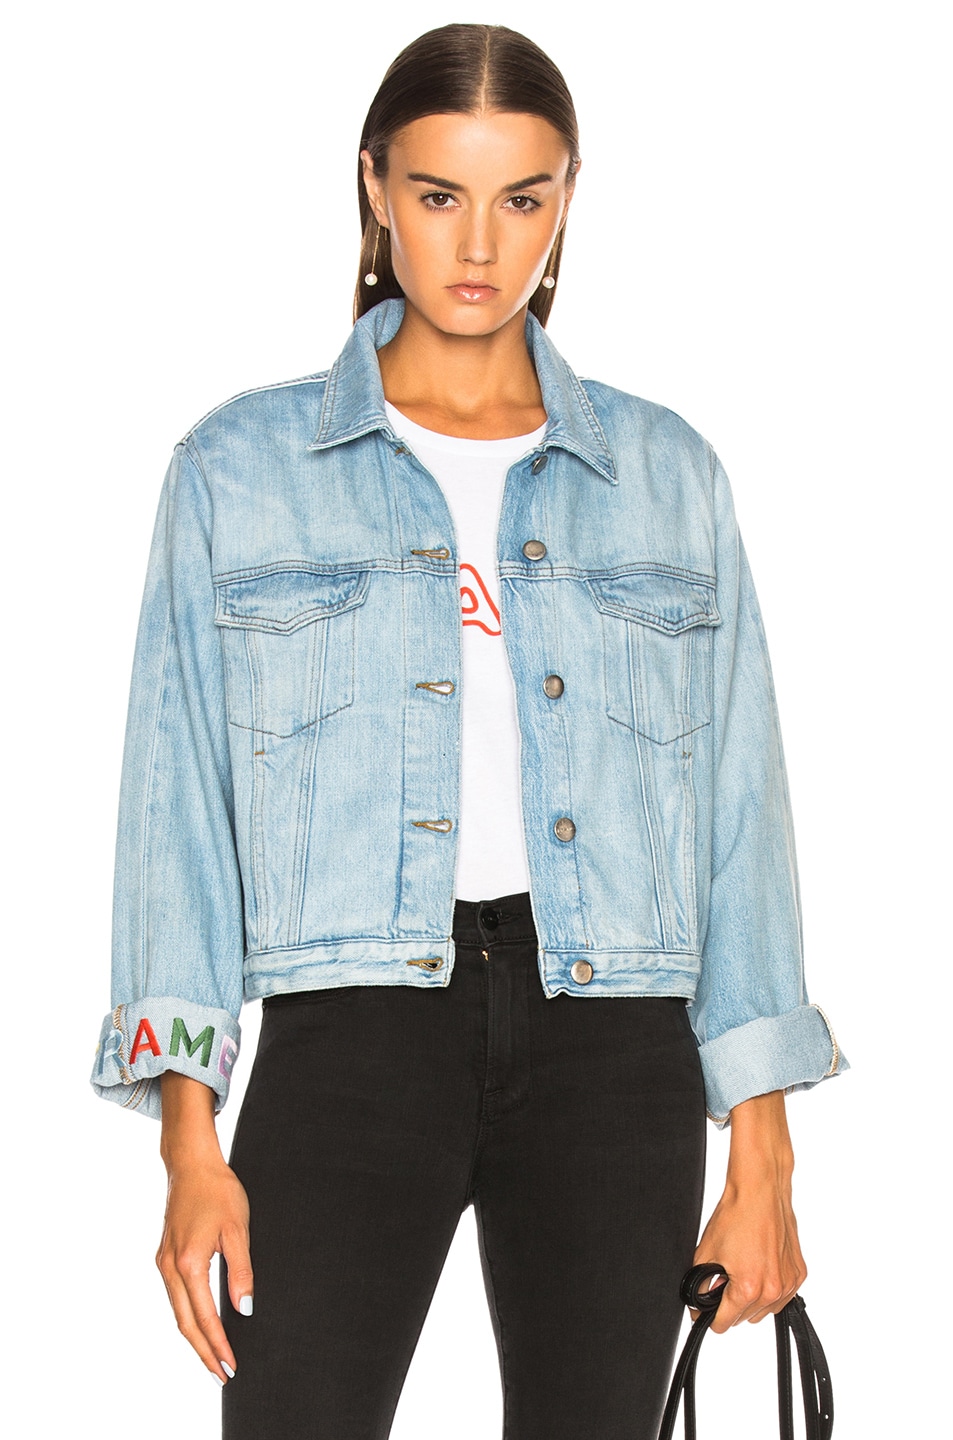 FRAME Embroidered Cuffed Jacket in Rydell Ave | FWRD